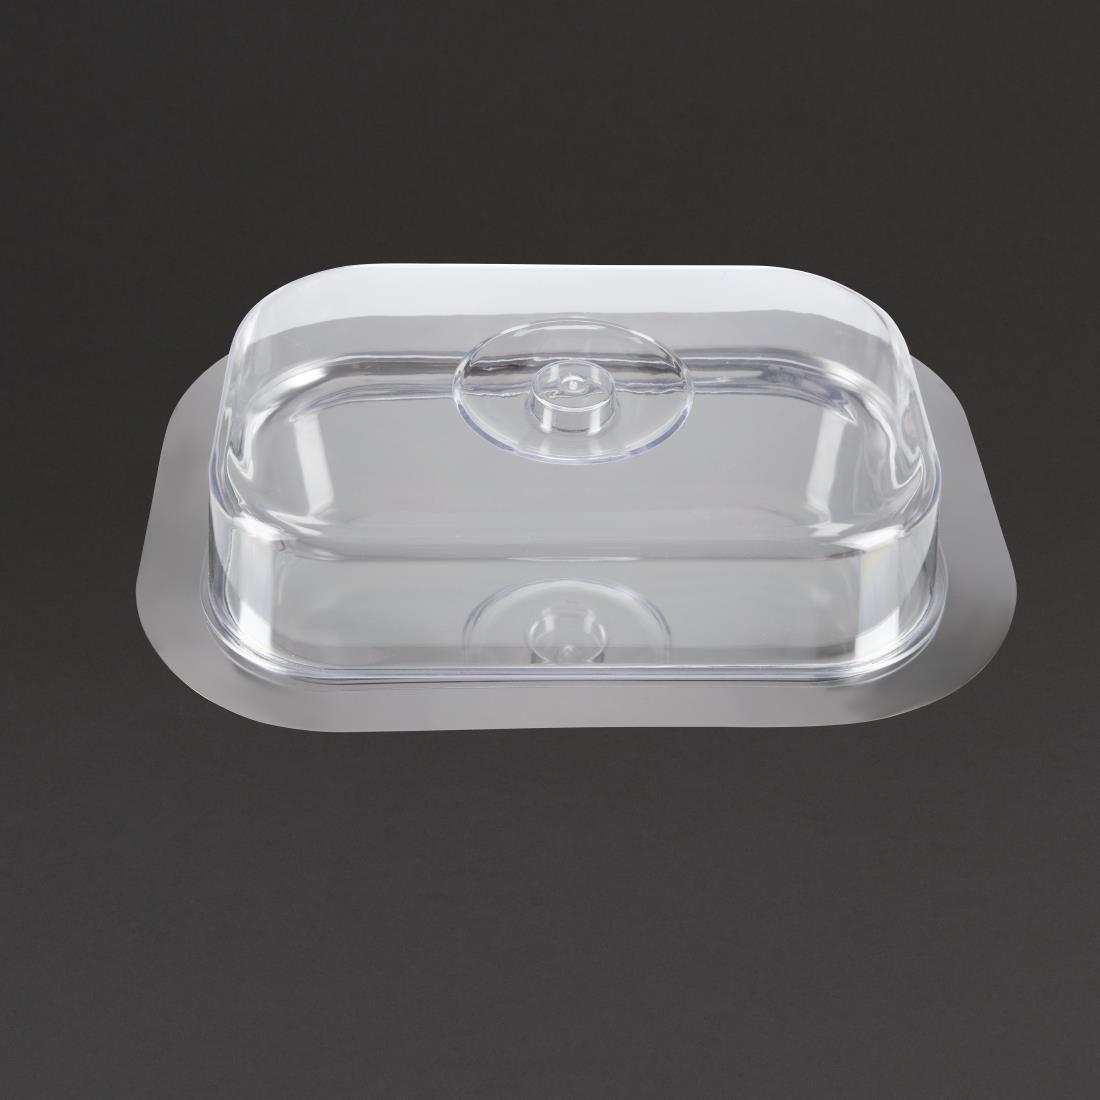 Rectangular Tray with Cover - F762  - 2